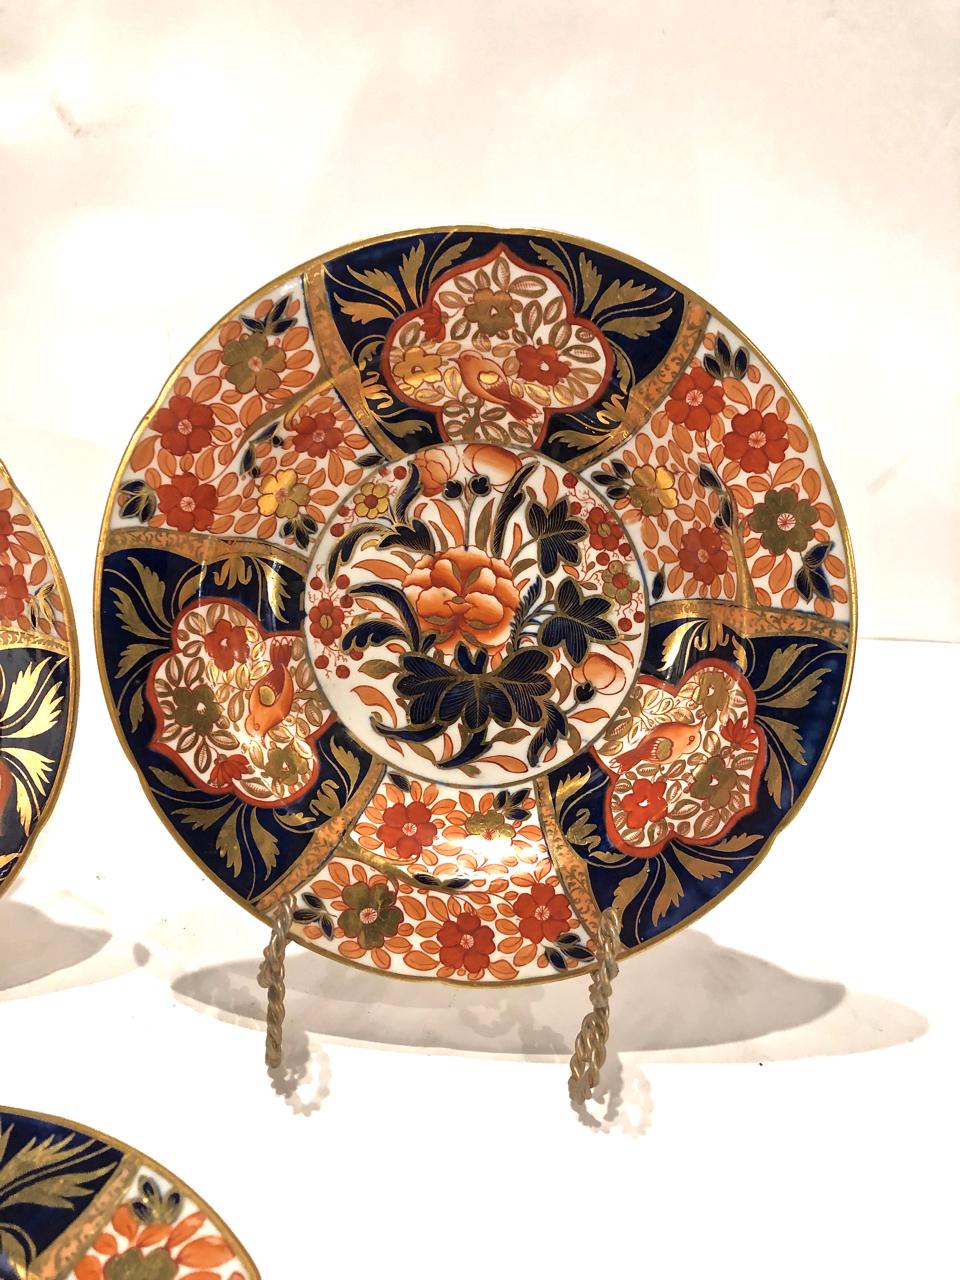 This is a set of three of early 19th century Coalport soup plates in an uncommon Imari pattern. The plates are densely decorated with a center reserve of an abstract peony surrounded by large reserves of birds and florals. The deep cobalt and iron